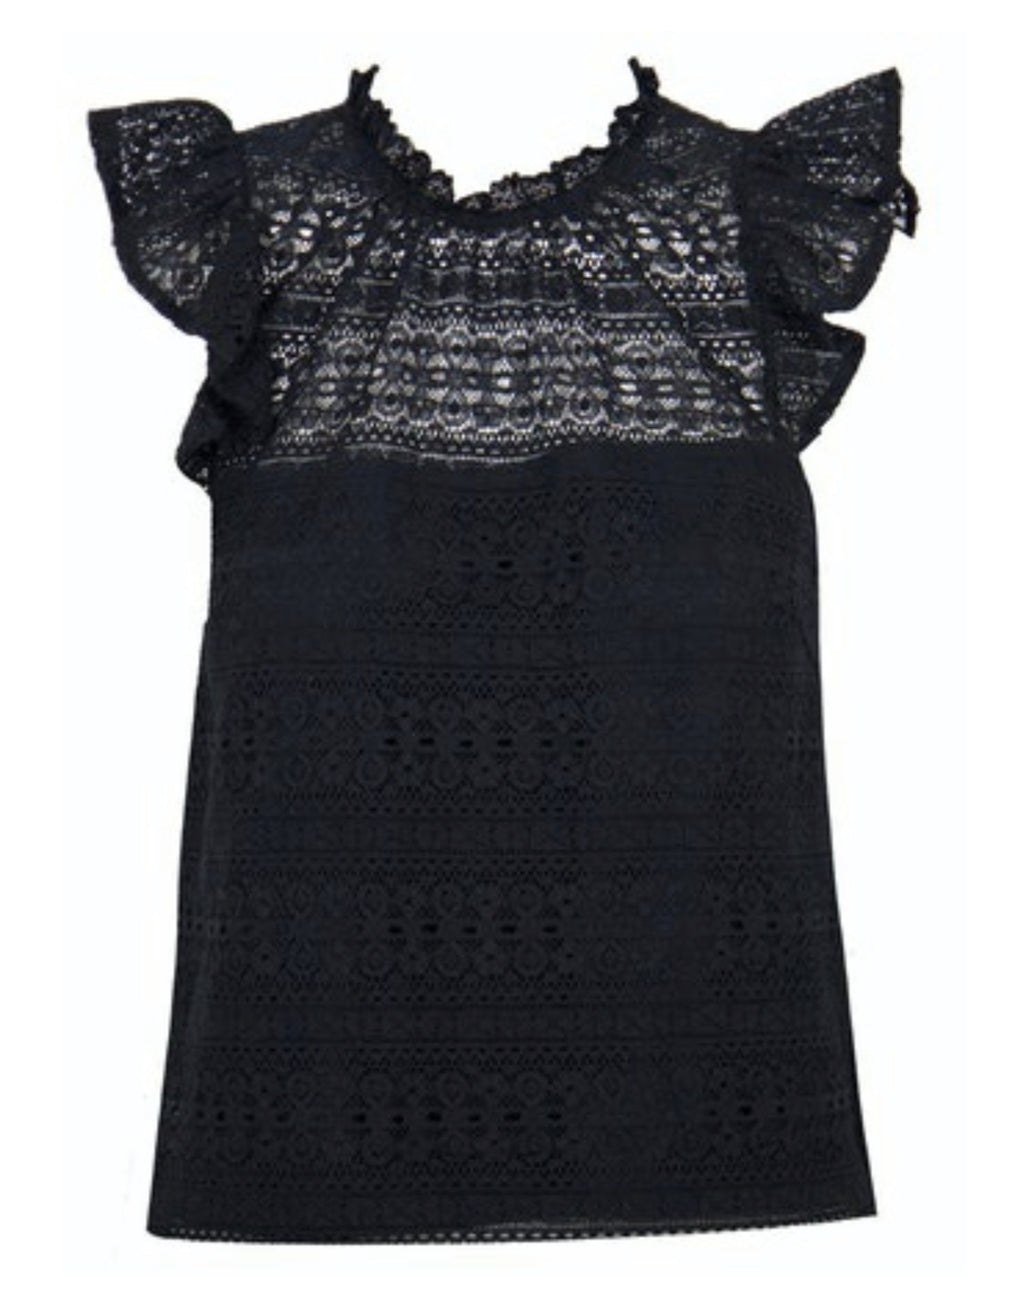 Look effortlessly chic in our Aurora Black Lace Top! With a combination of cotton and polyamide, this top is sure to last and won't wrinkle easily. The lining made of polyester and spandex ensures extra comfort and a perfect fit. The best part? It requires minimal effort to look stylish!   Details:   Shell: 67% Cotton 33% Polyamide  Lining: 92% Polyester 8% Spandex  Hand wash, hang to dry  Runs true to size